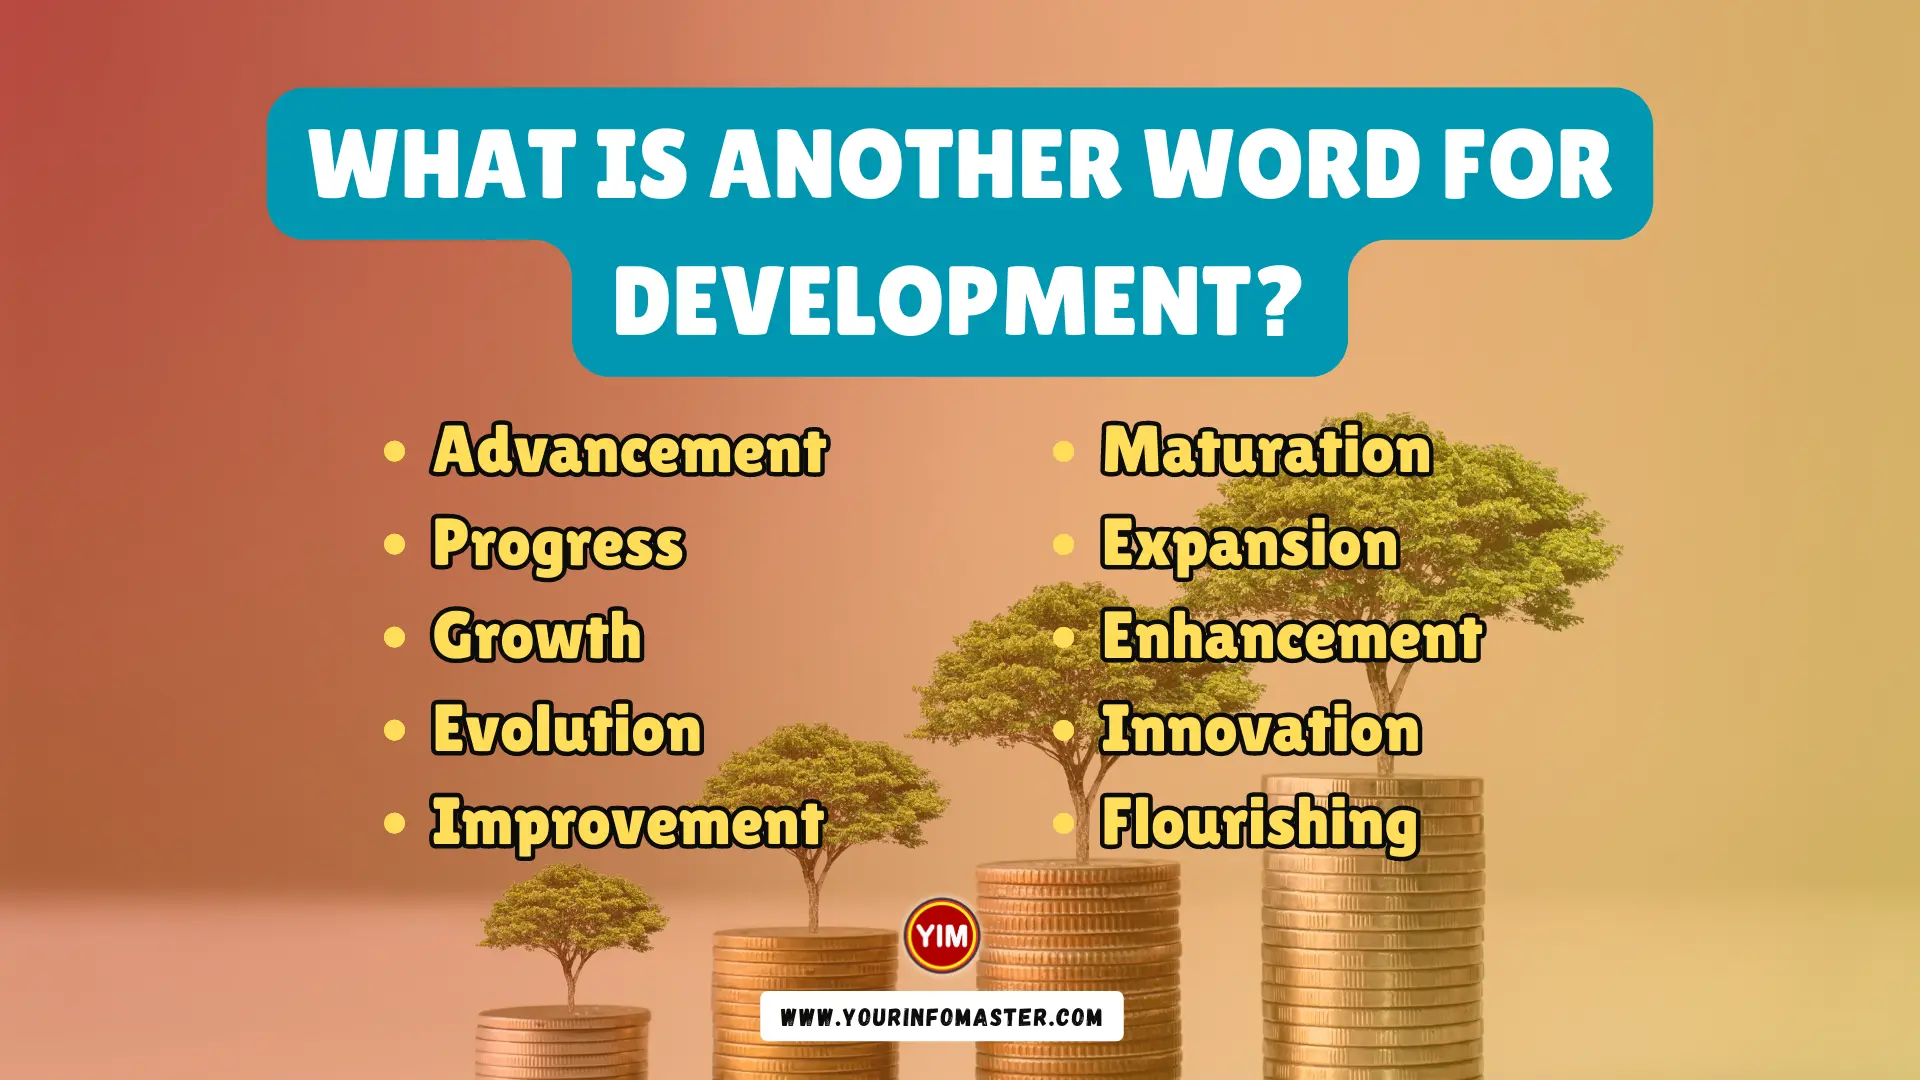 What is another word for Development